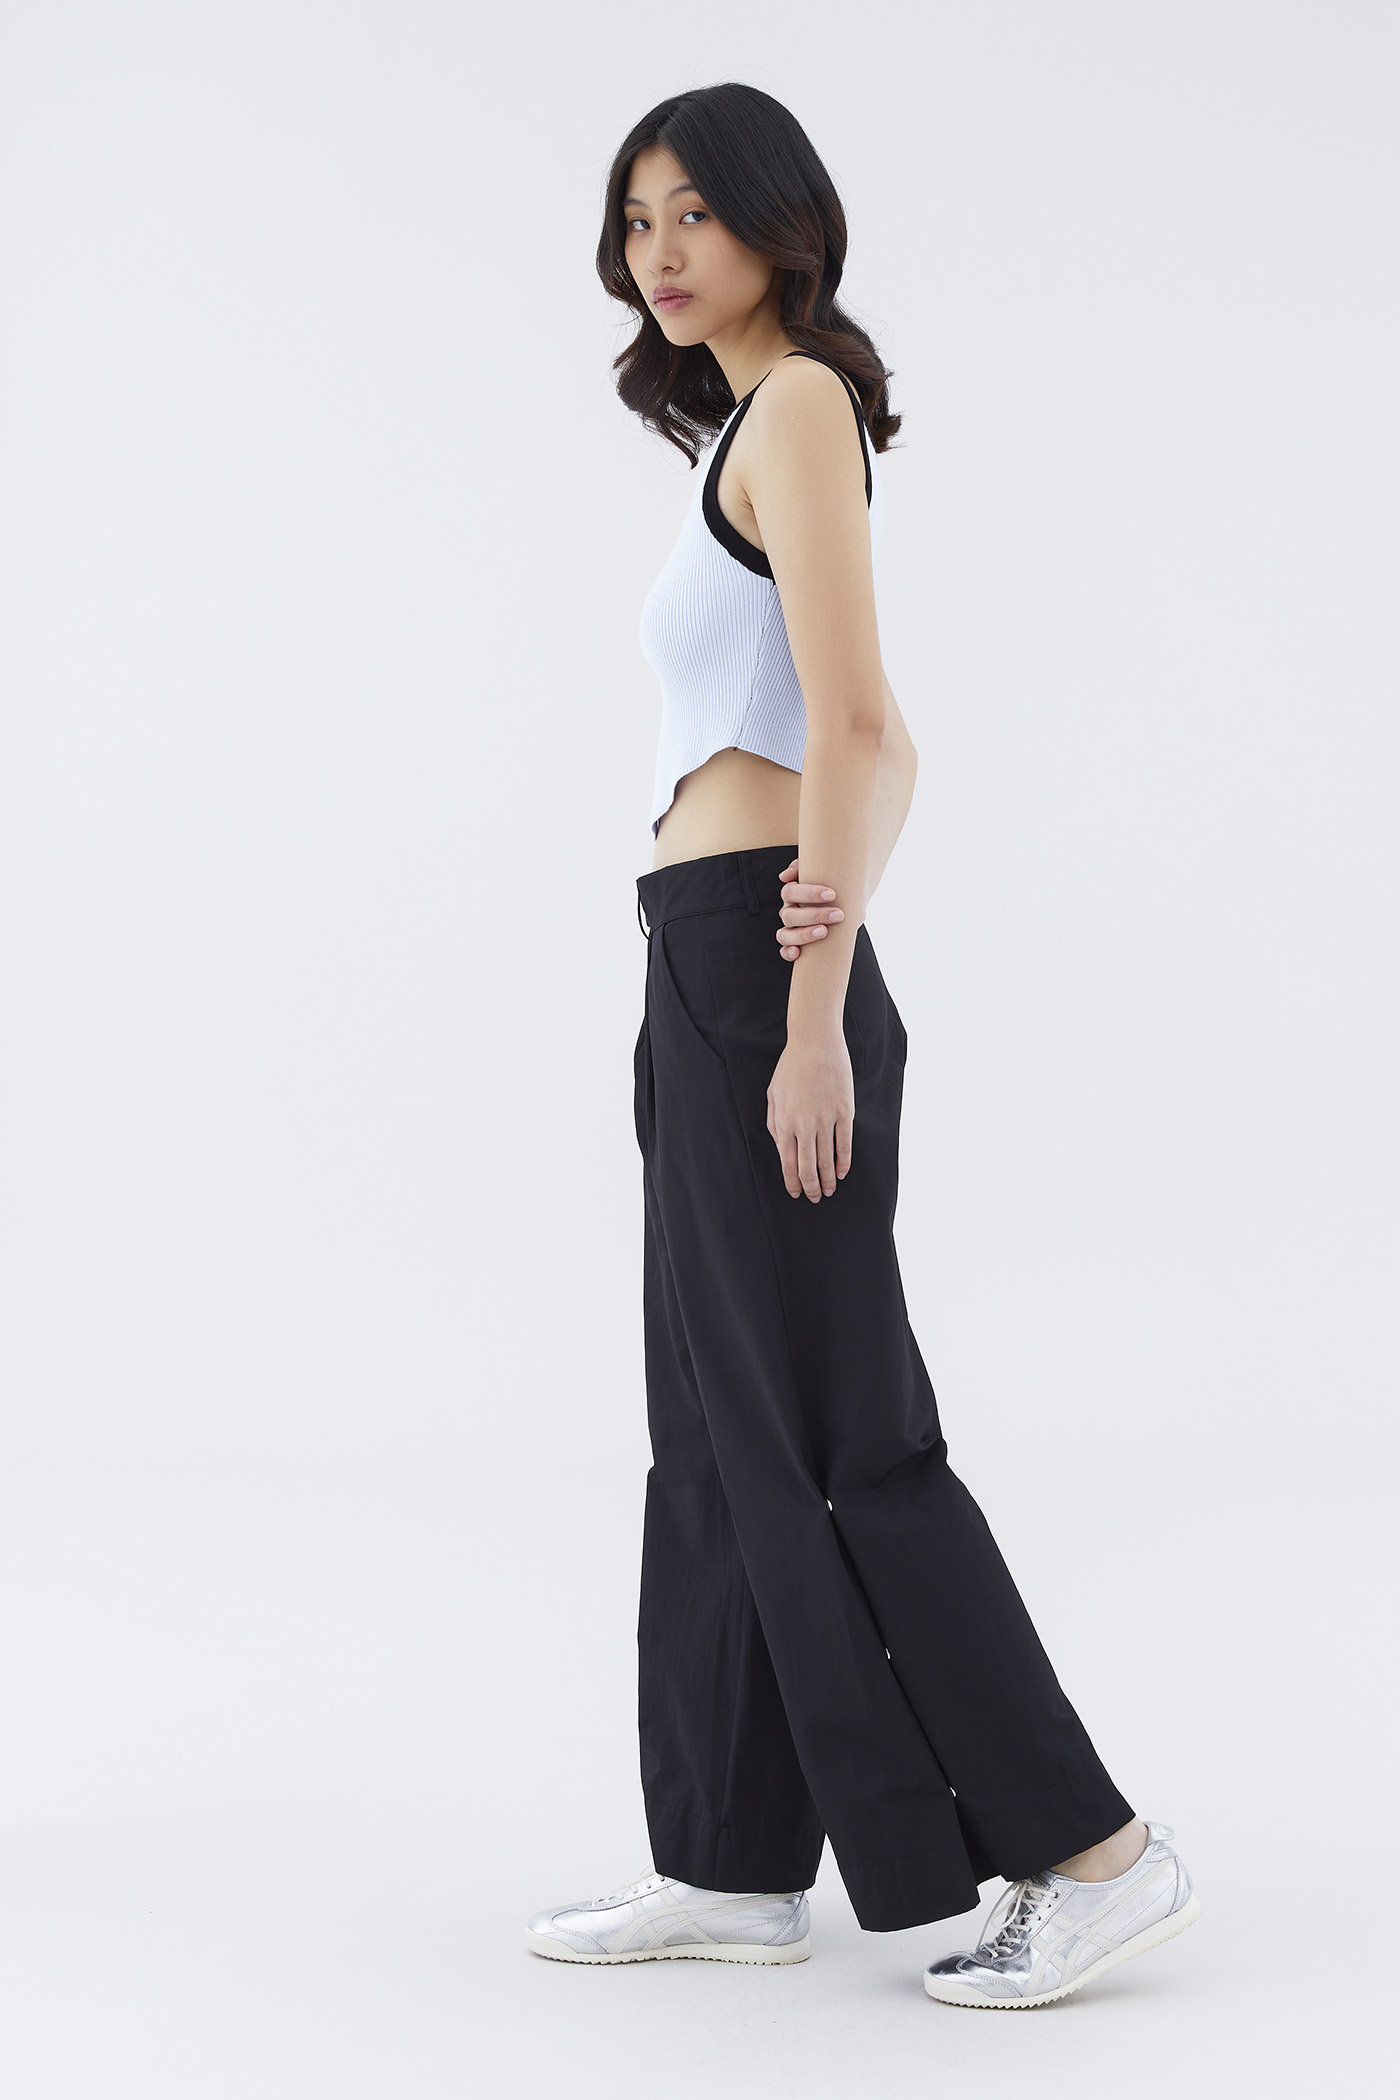 Buy Insia Brand Women Mid Waist Loose Tape Button Side Wide Leg Trousers  (Black, L) at Amazon.in